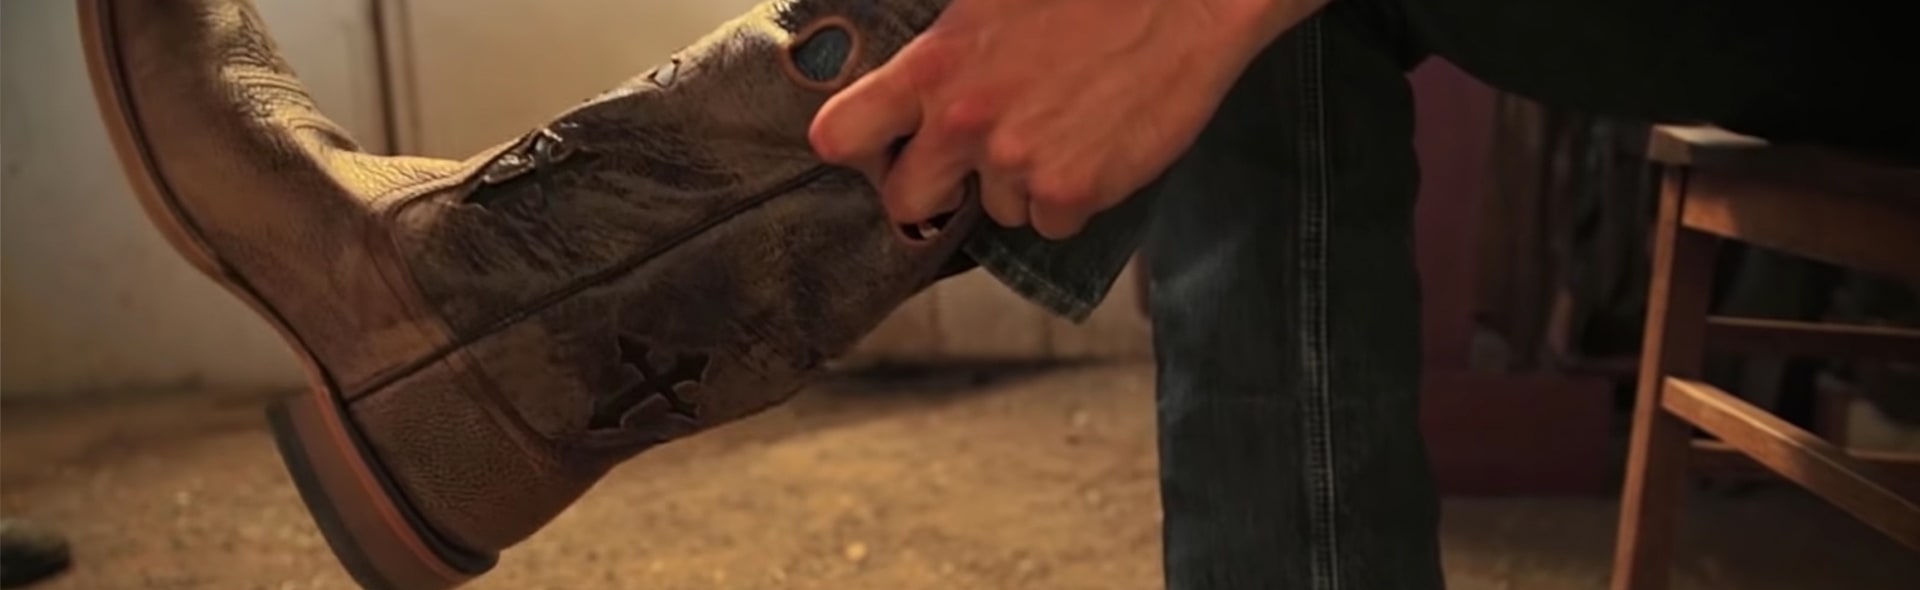 How to Fit Cowboy Boots